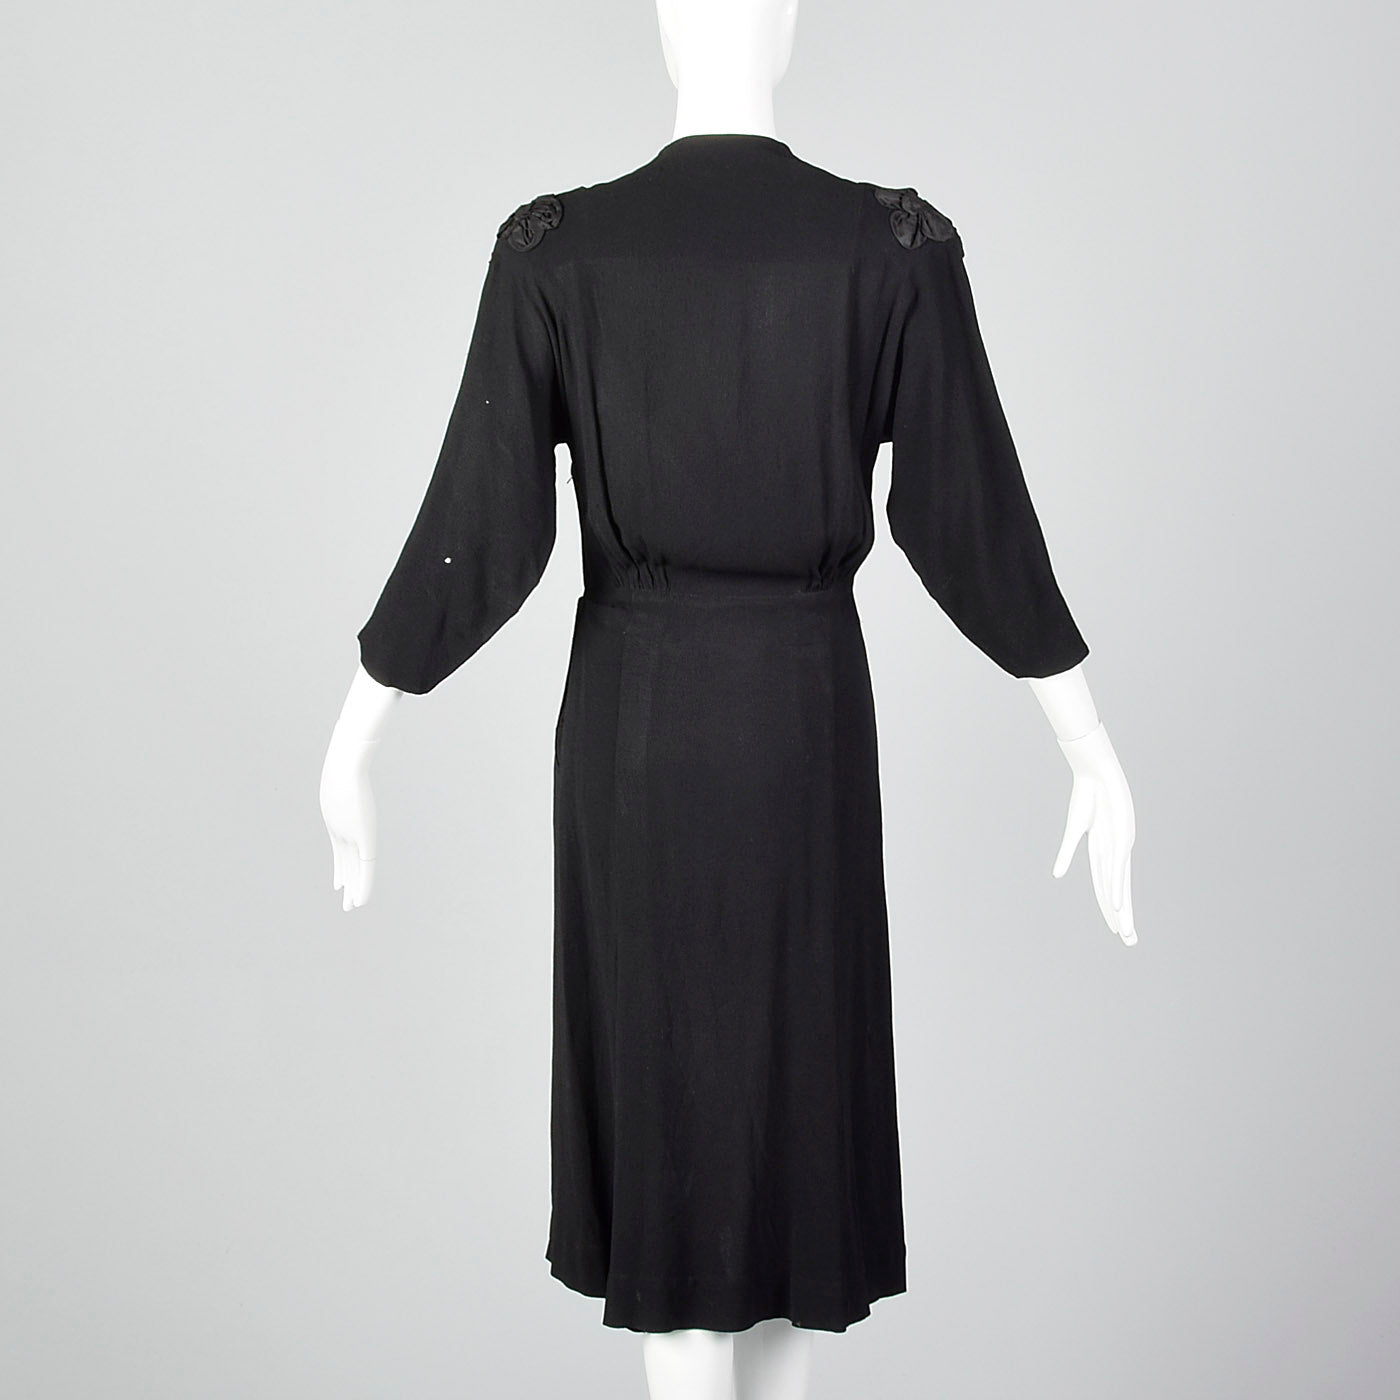 1940s Black Dress with Three Dimensional Applique and Soutache